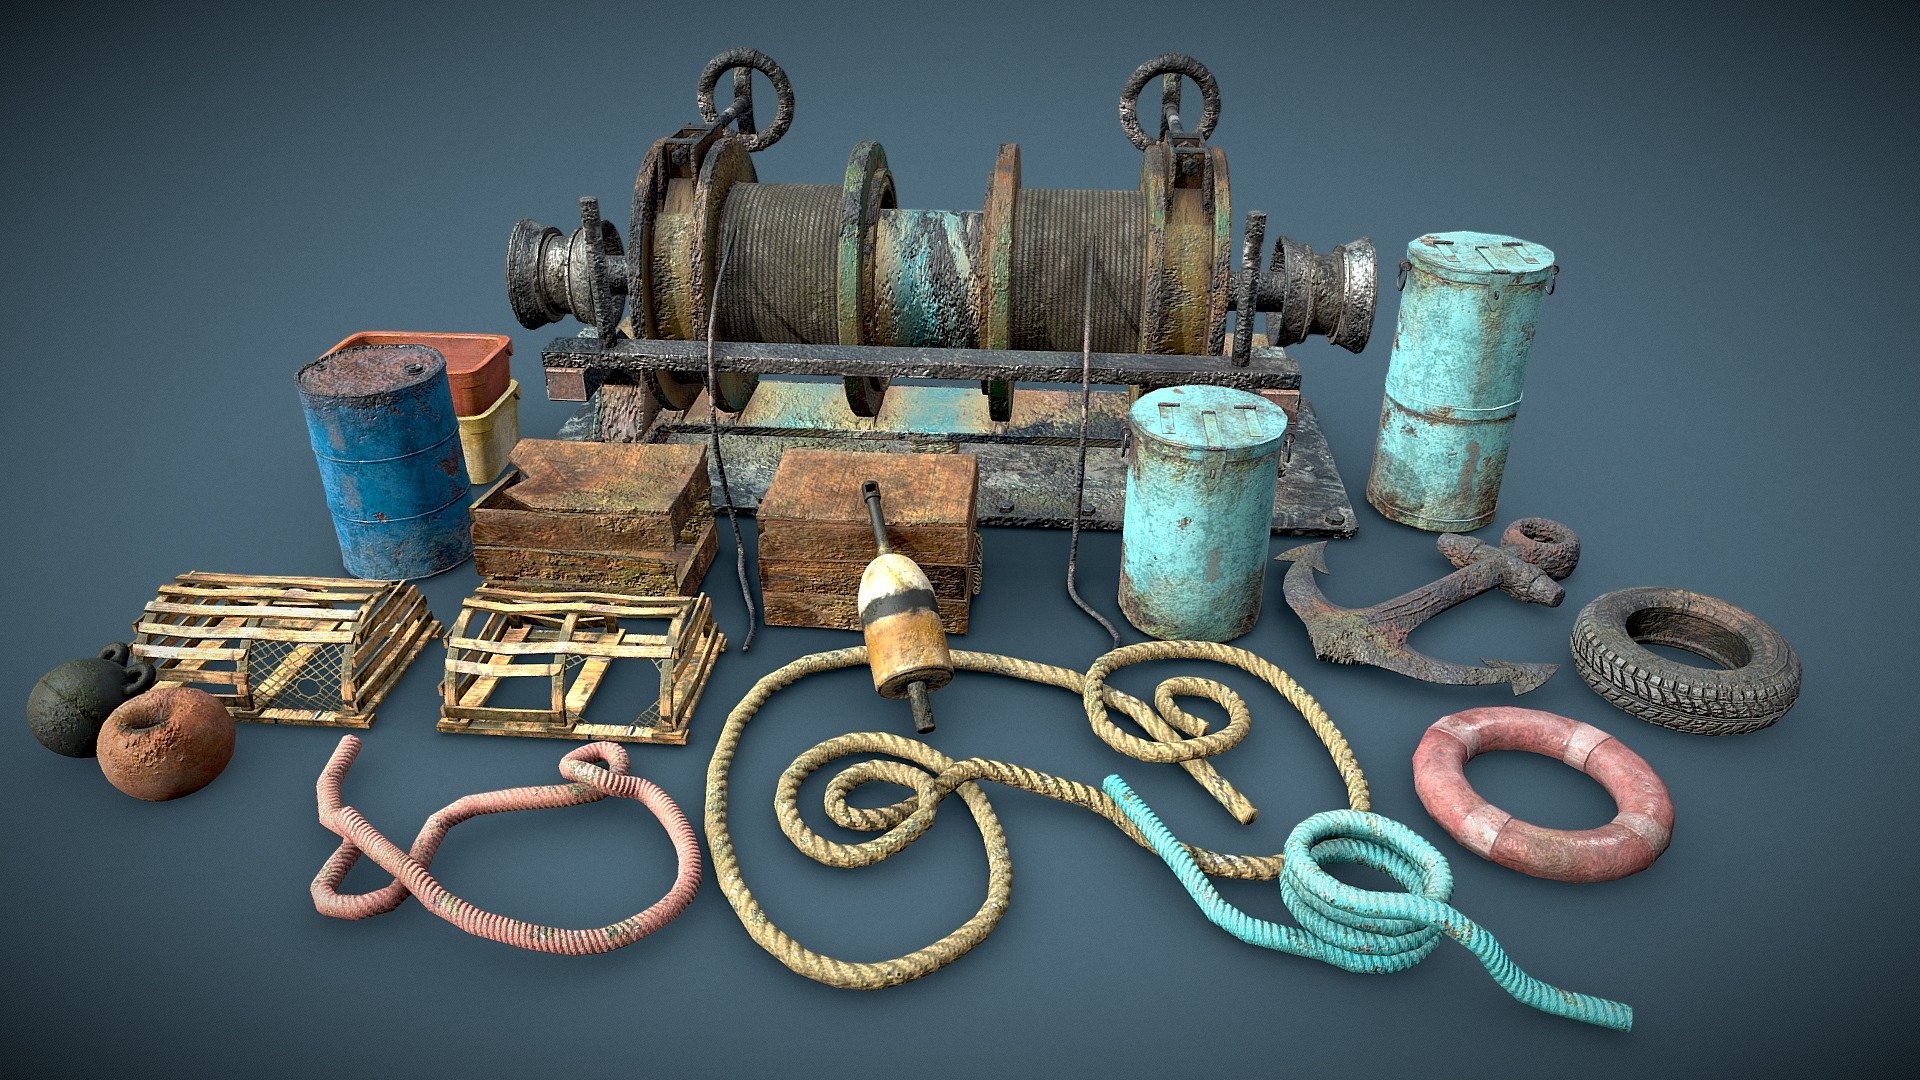 These assets were created for my personal project &ldquo;Wreckage at Land's End